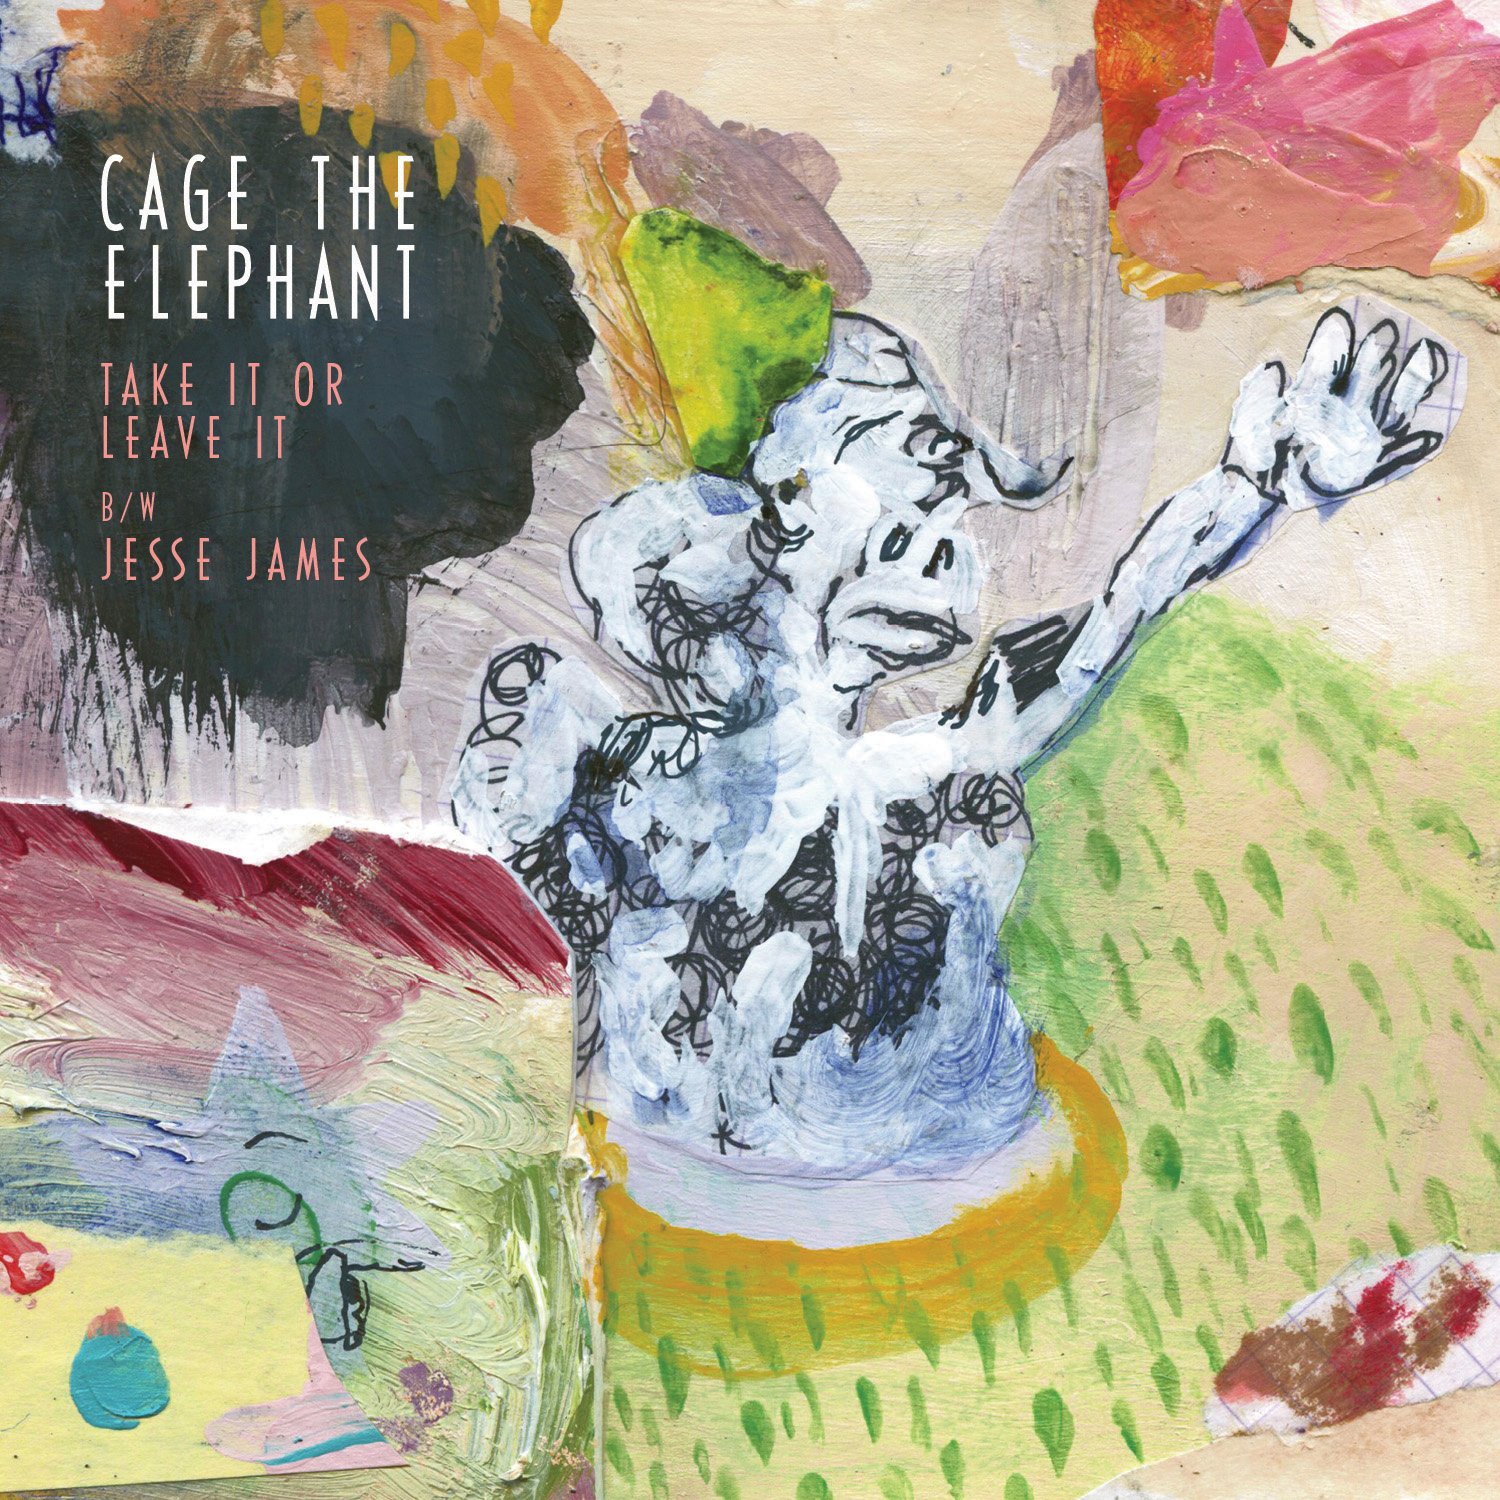 Cage the elephant come a little. Cage the Elephant. Группа Cage the Elephant. Cage the Elephant солист. Мэтью Шульц Cage the Elephant.